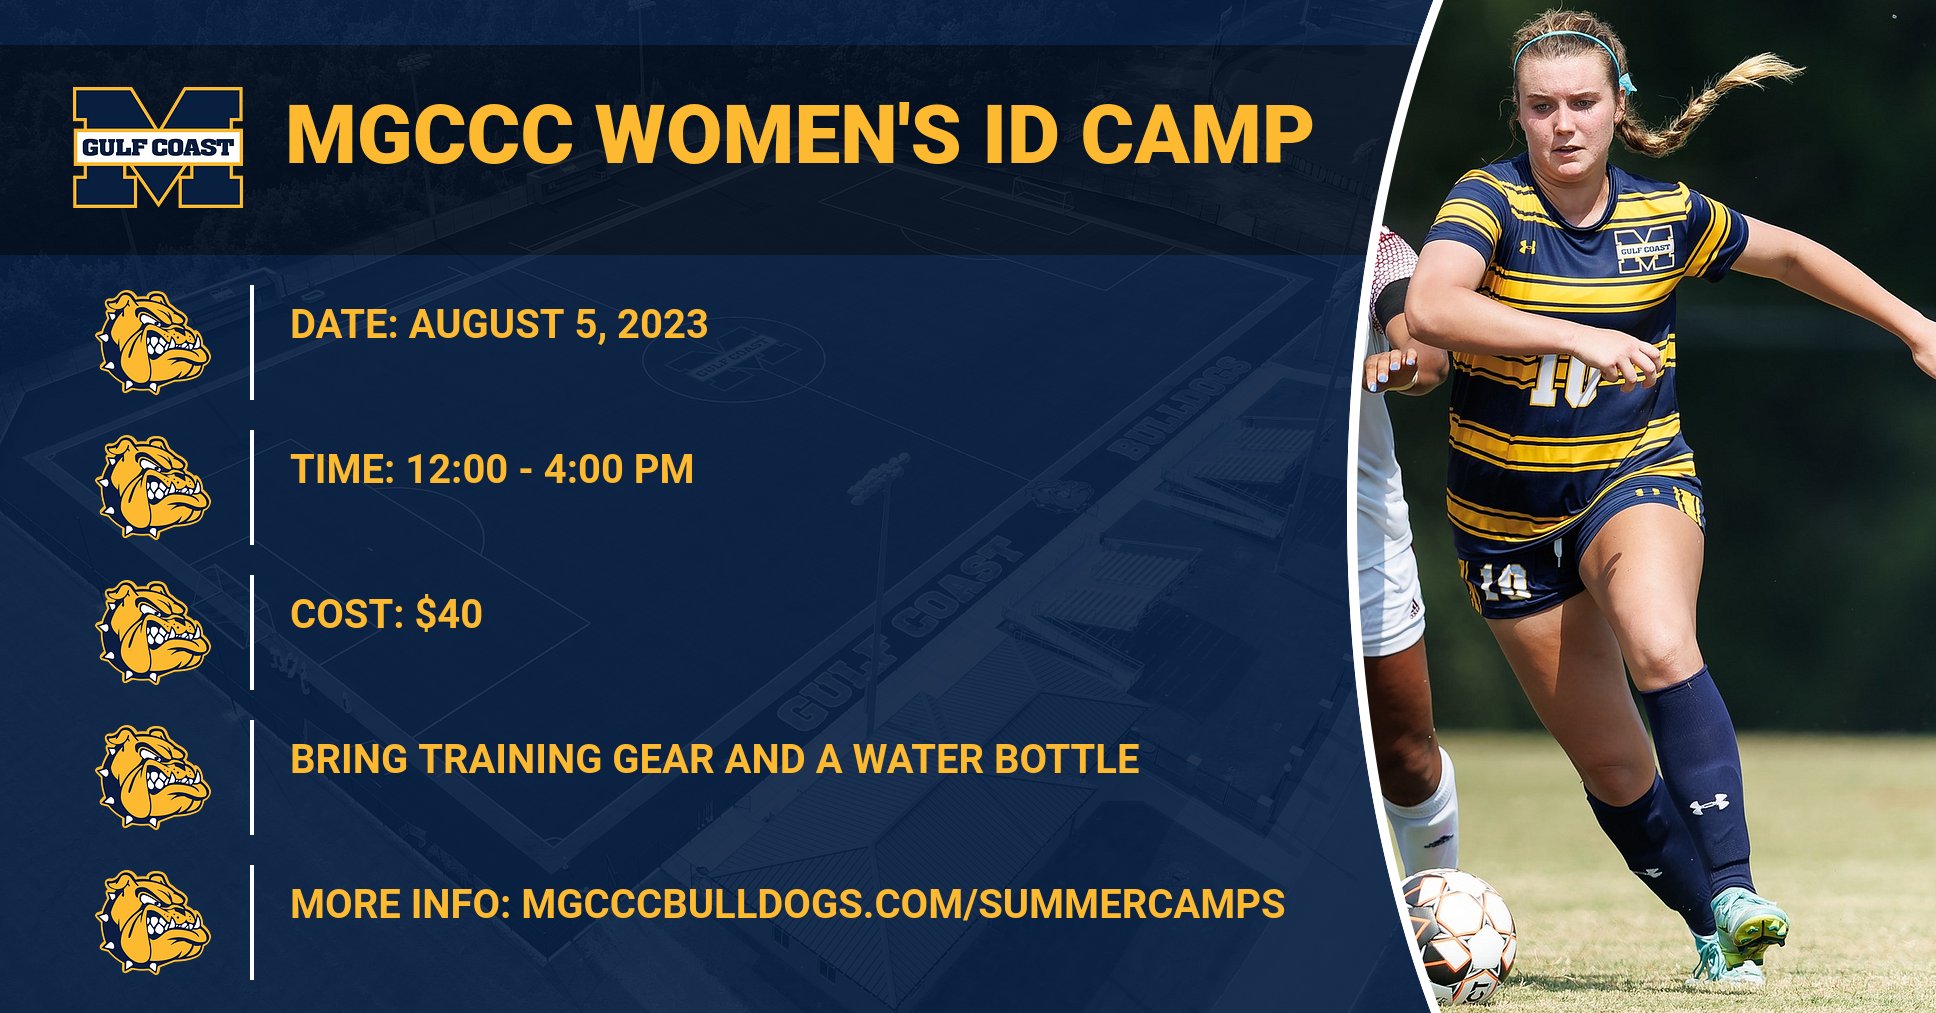 Register now for MGCCC Women’s Soccer ID Camp